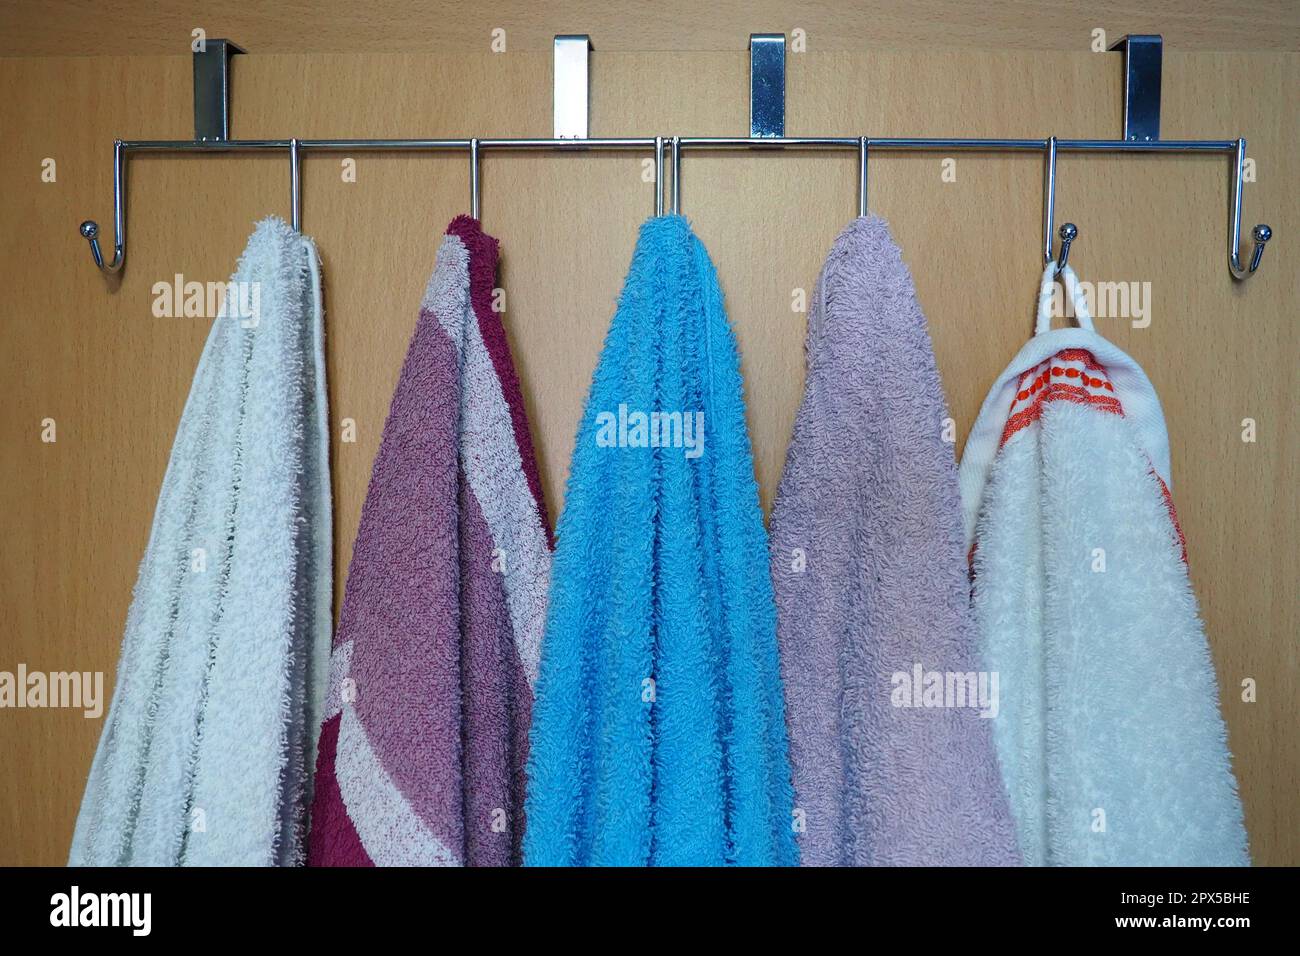 White, blue, pink towels hanging from metal hooks attached to the